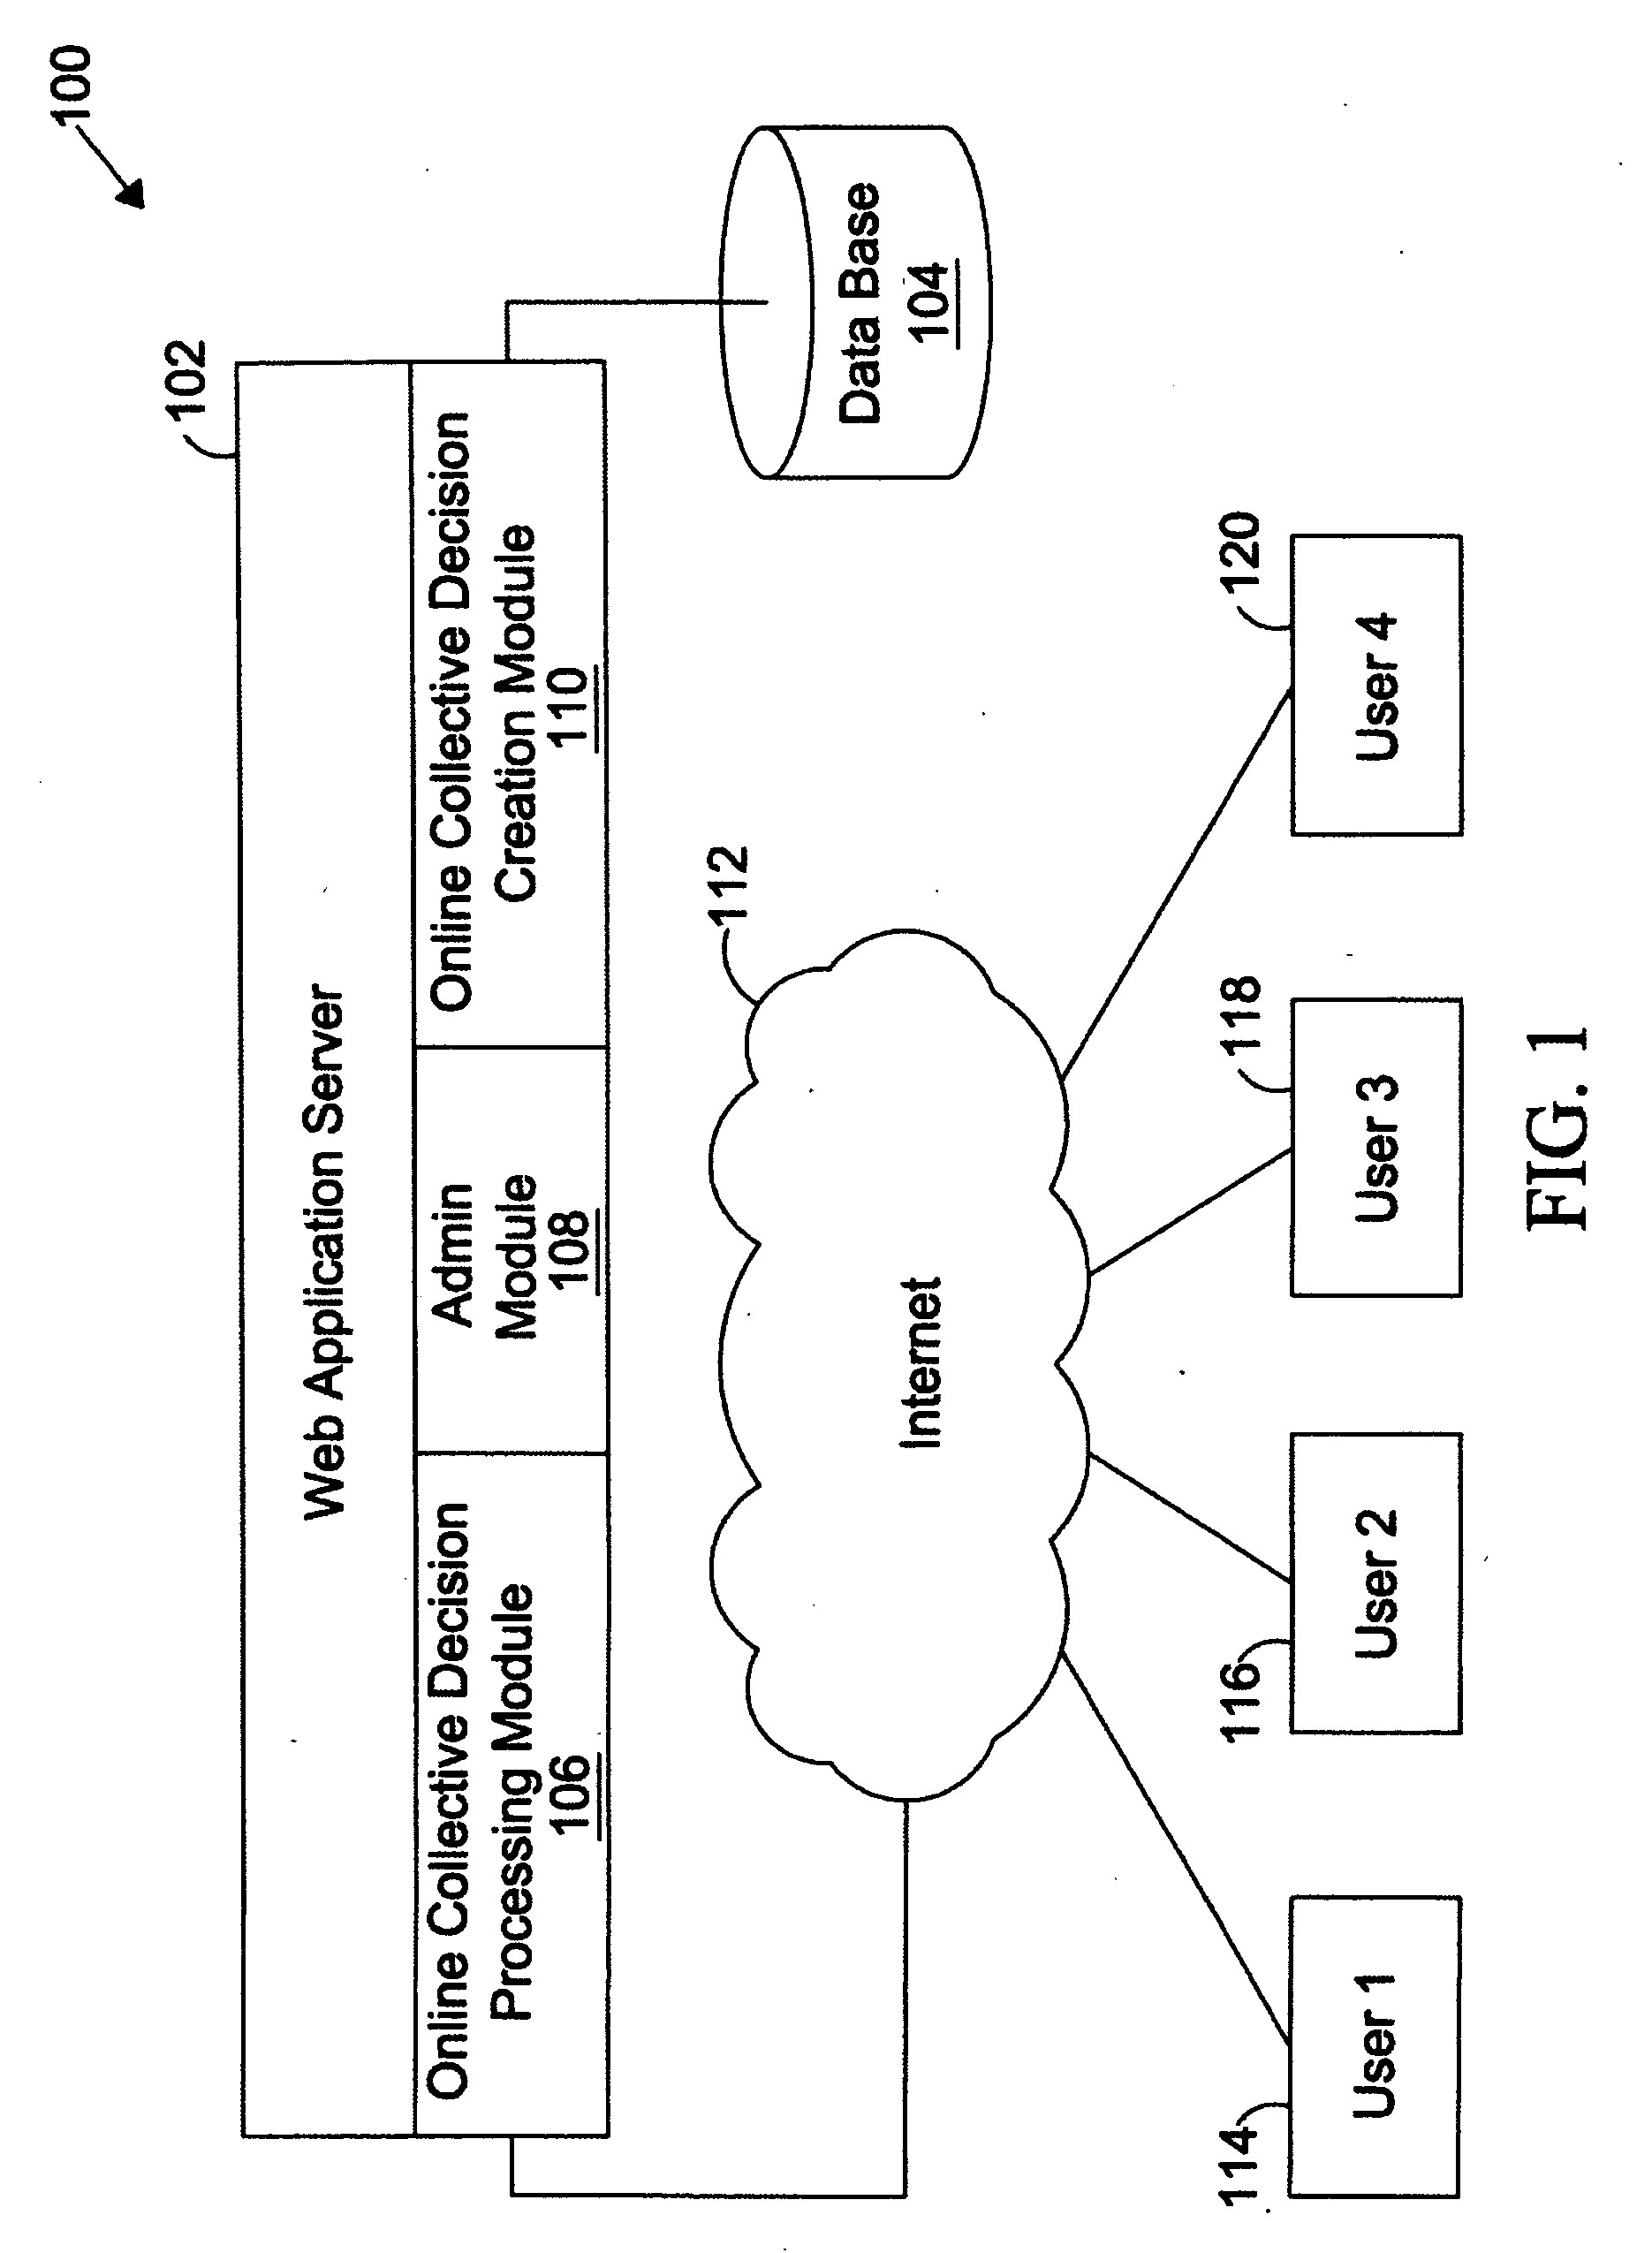 System and method for online collective decision making